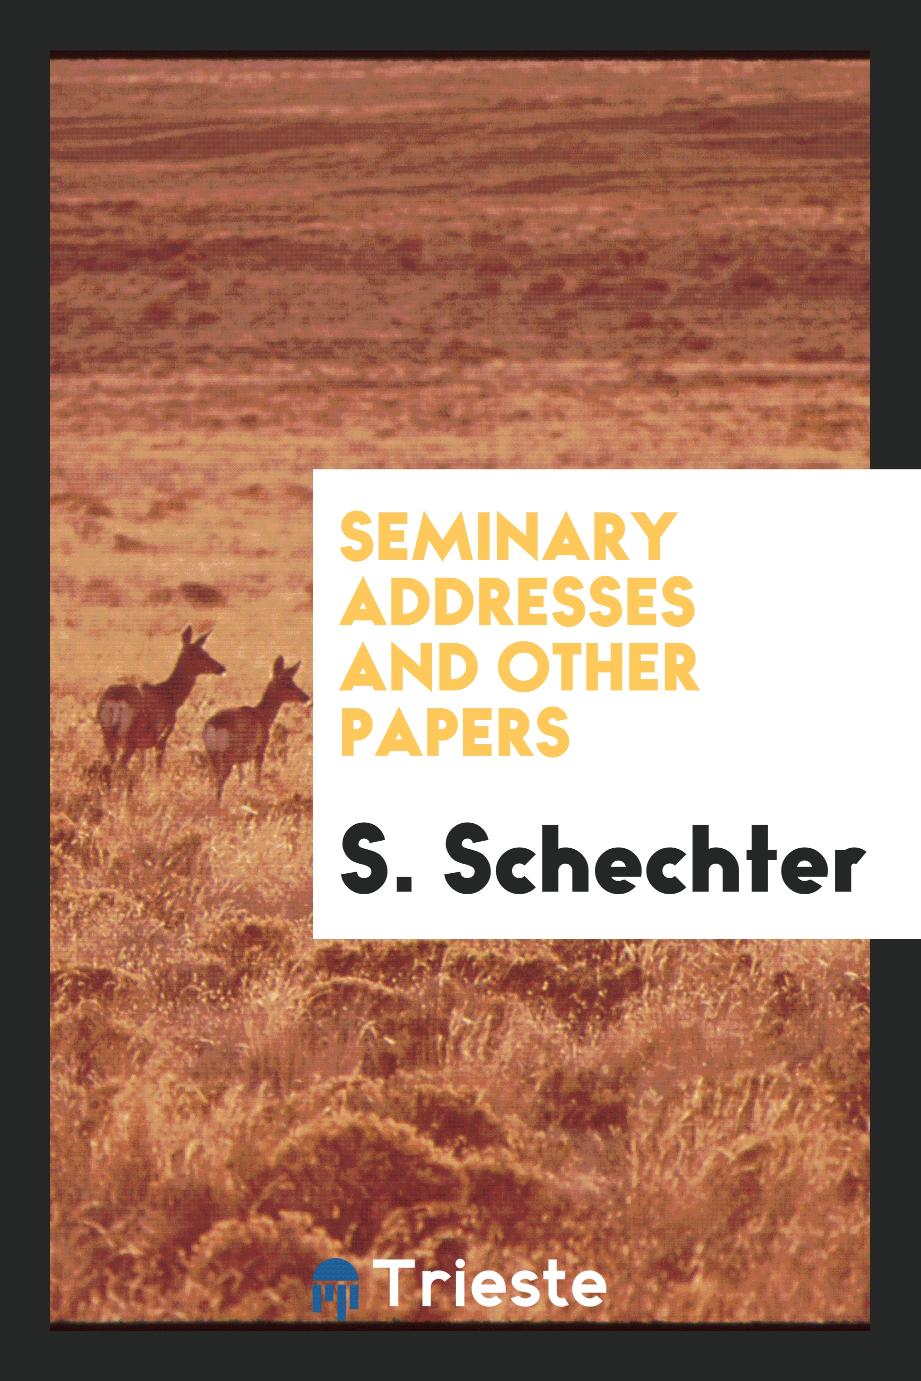 Seminary addresses and other papers